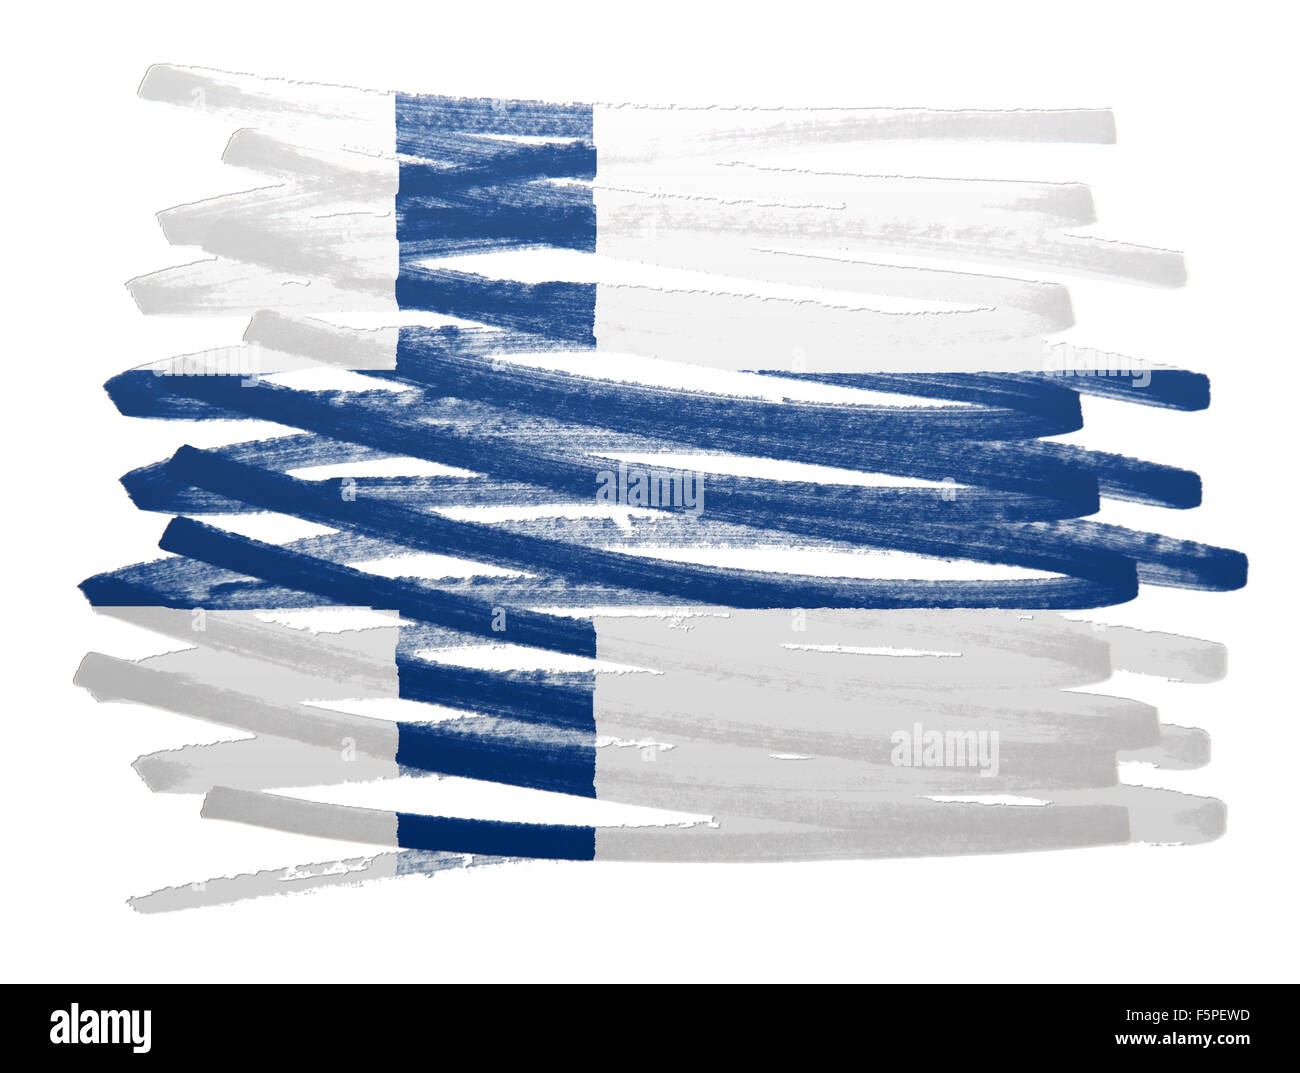 Flag illustration made with pen - Finland Stock Photo